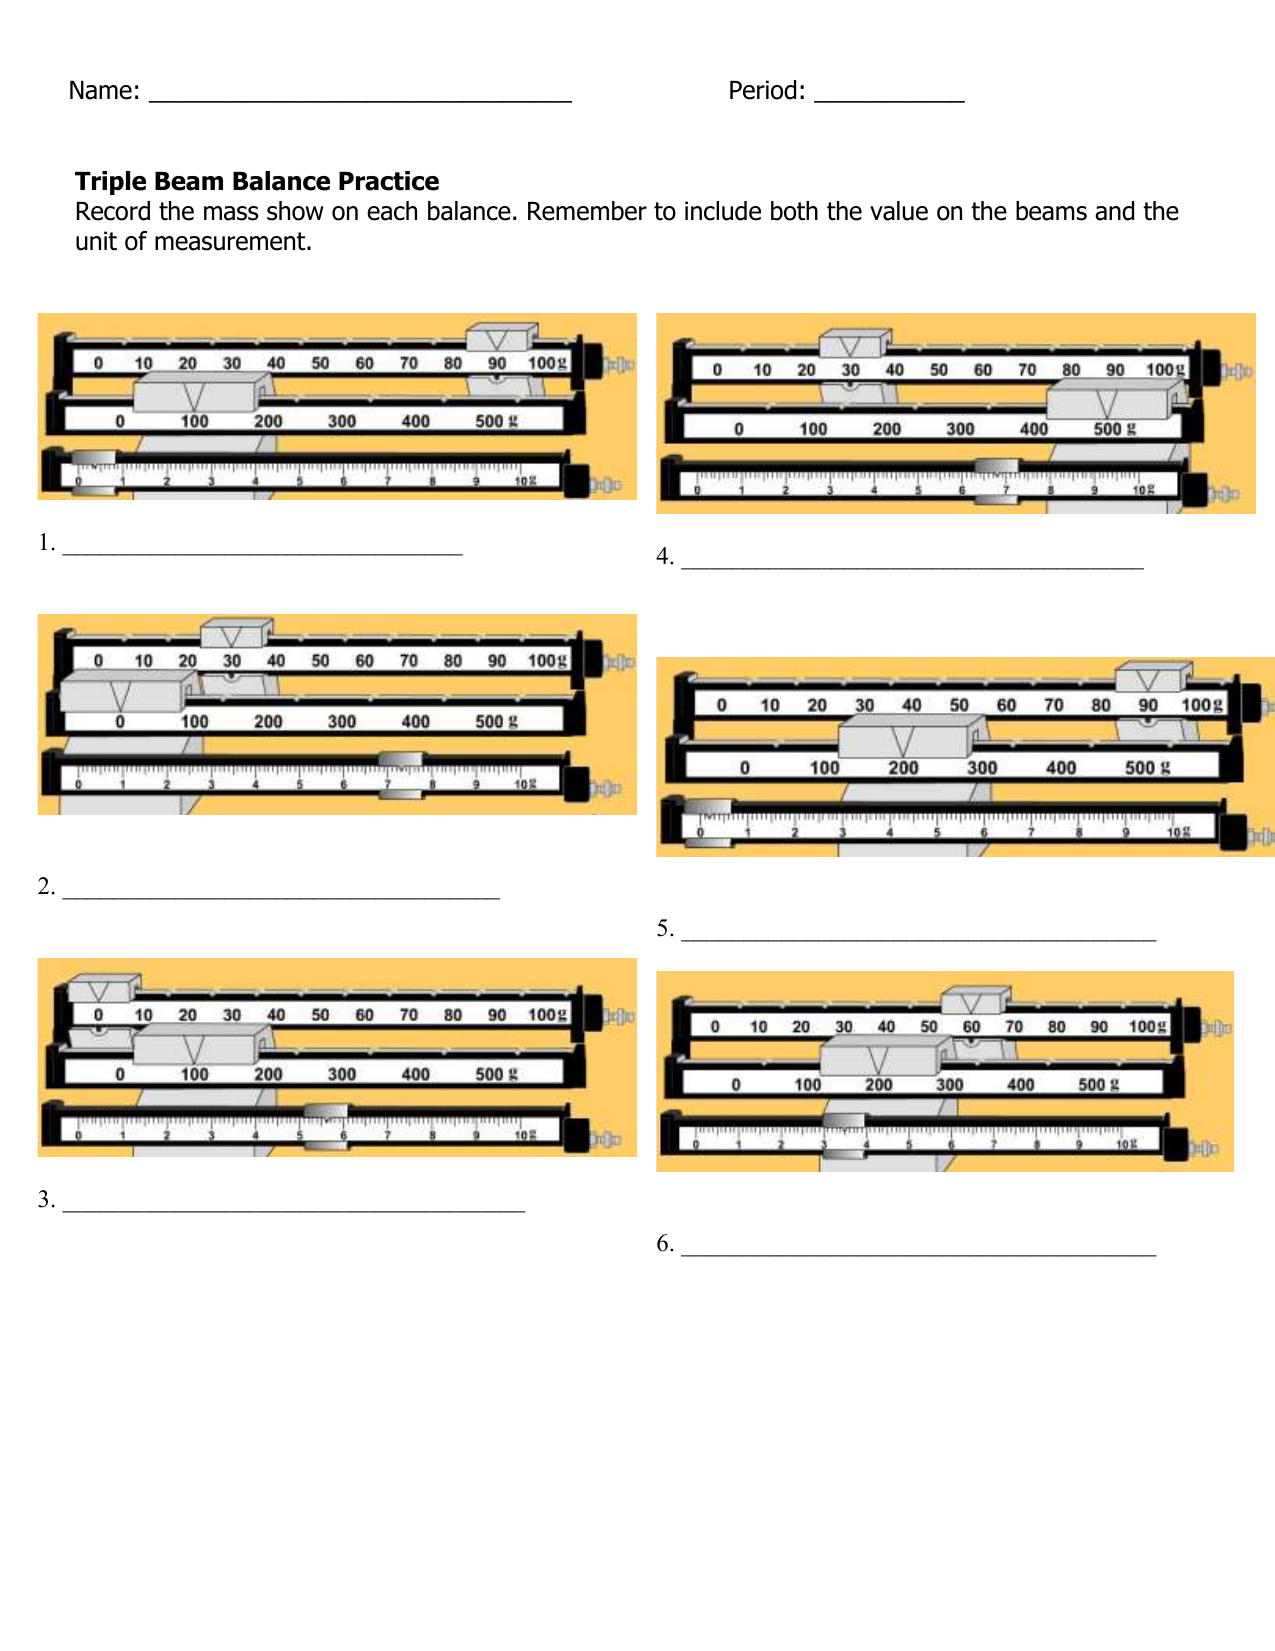 a-triple beam balance practice Throughout Triple Beam Balance Practice Worksheet